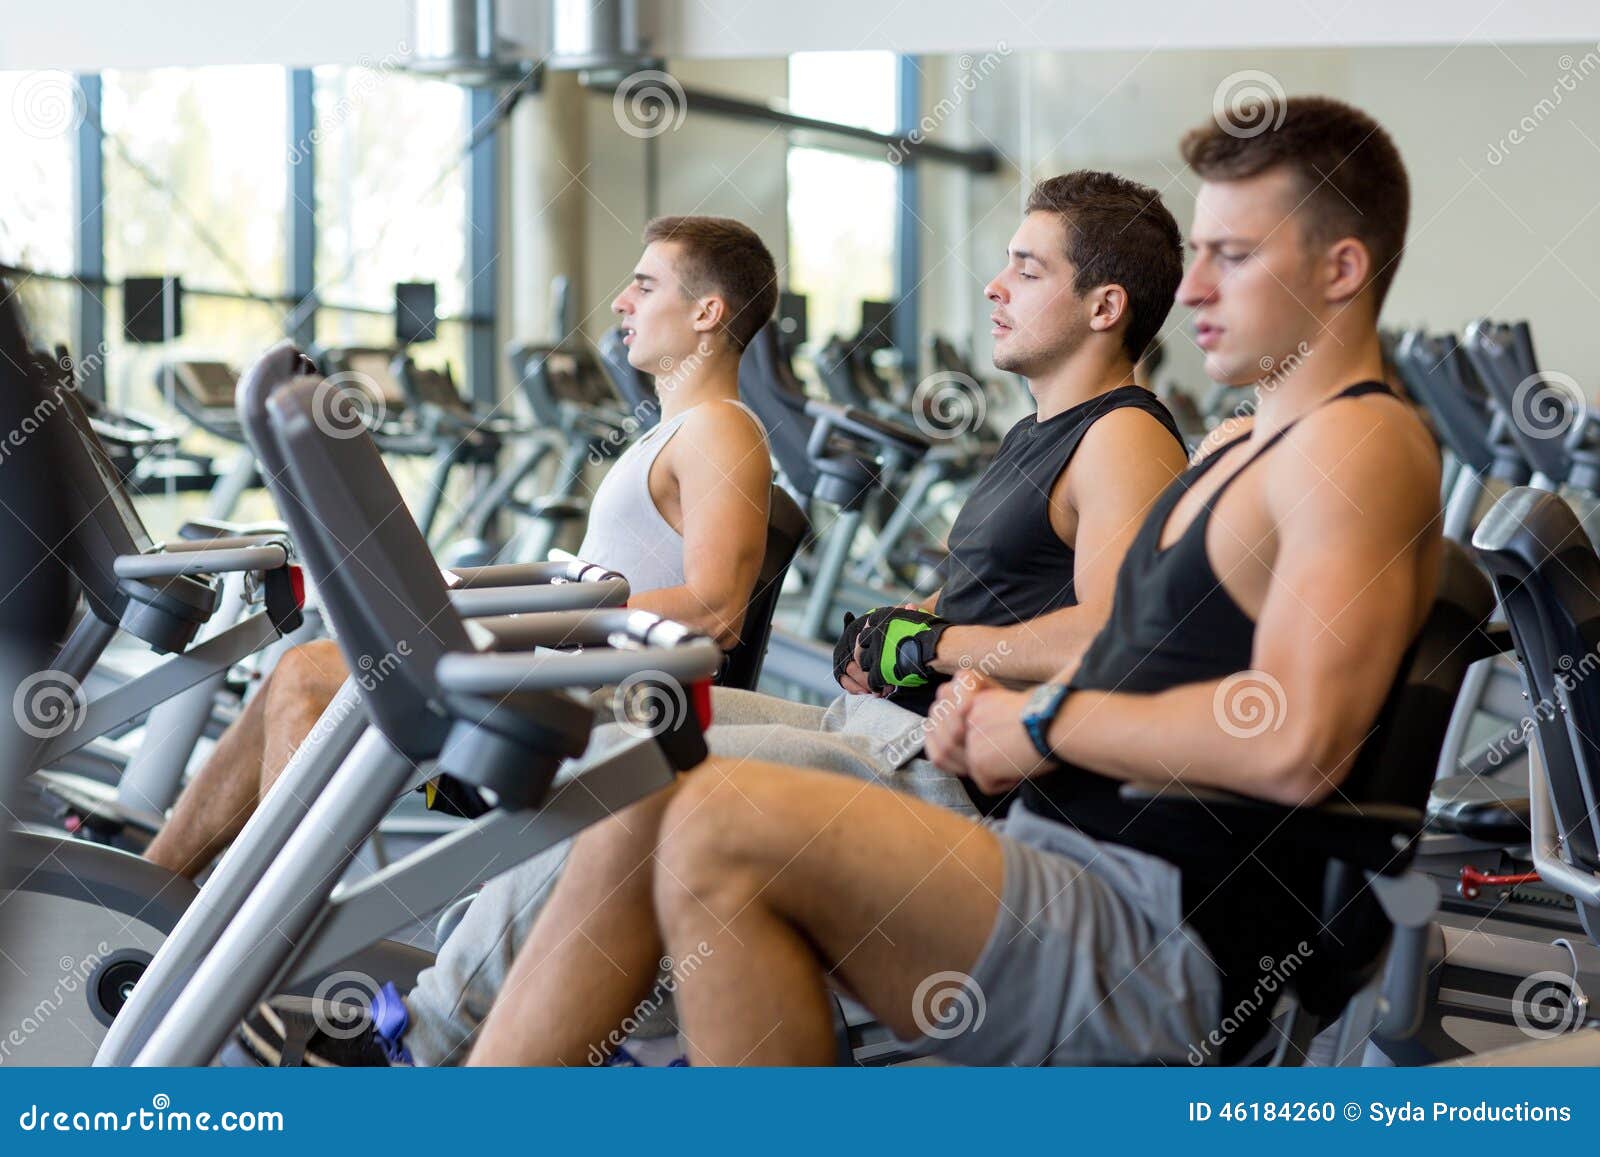 Men Working Out on Exercise Bike in Gym Stock Photo - Image of health,  male: 46184260